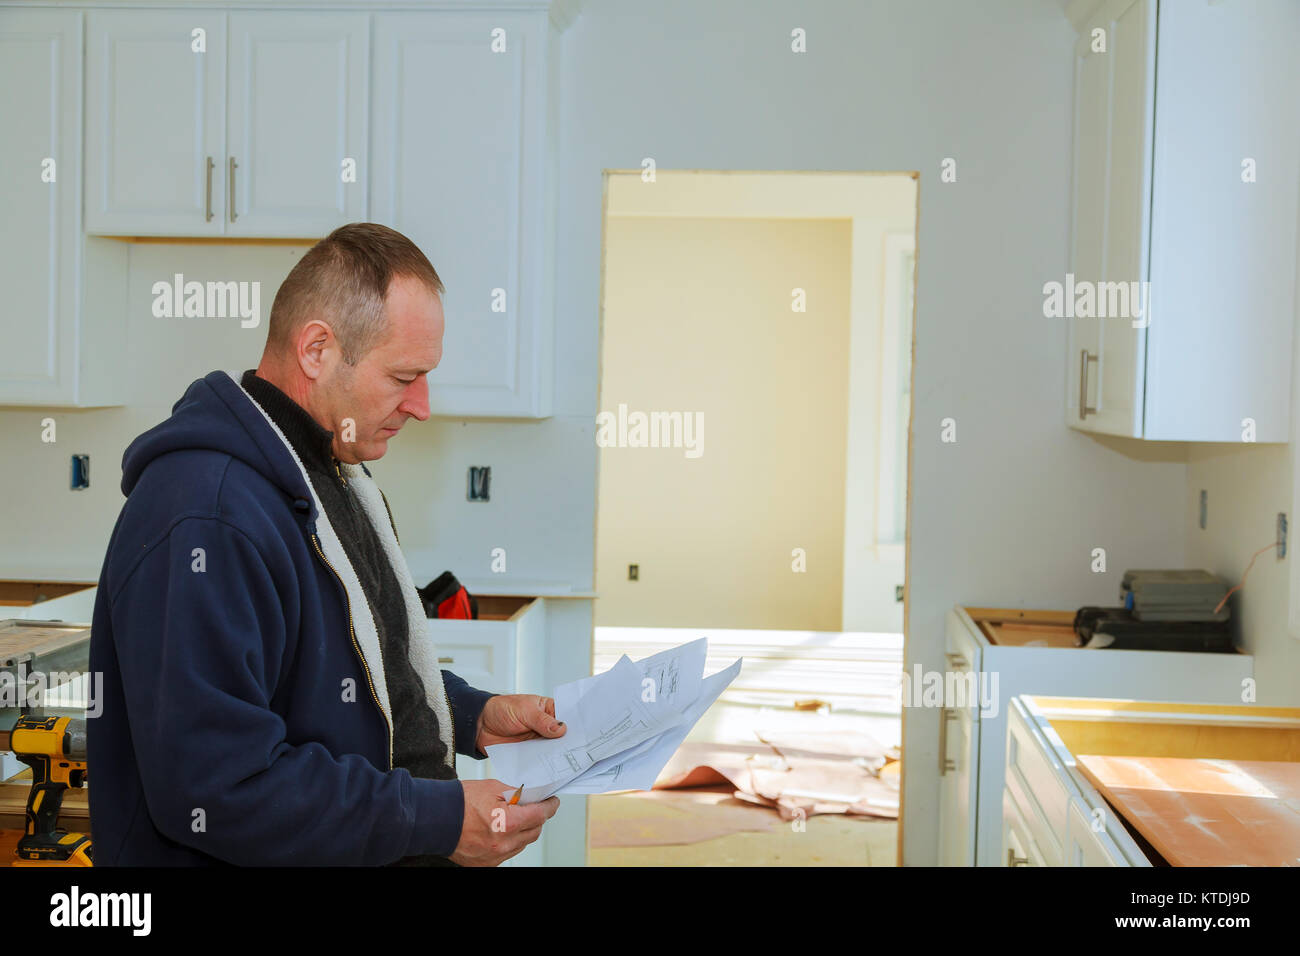 the worker keeps a plan for installing the kitchen cabinets Carpenter working on new kitchen cabinets Stock Photo